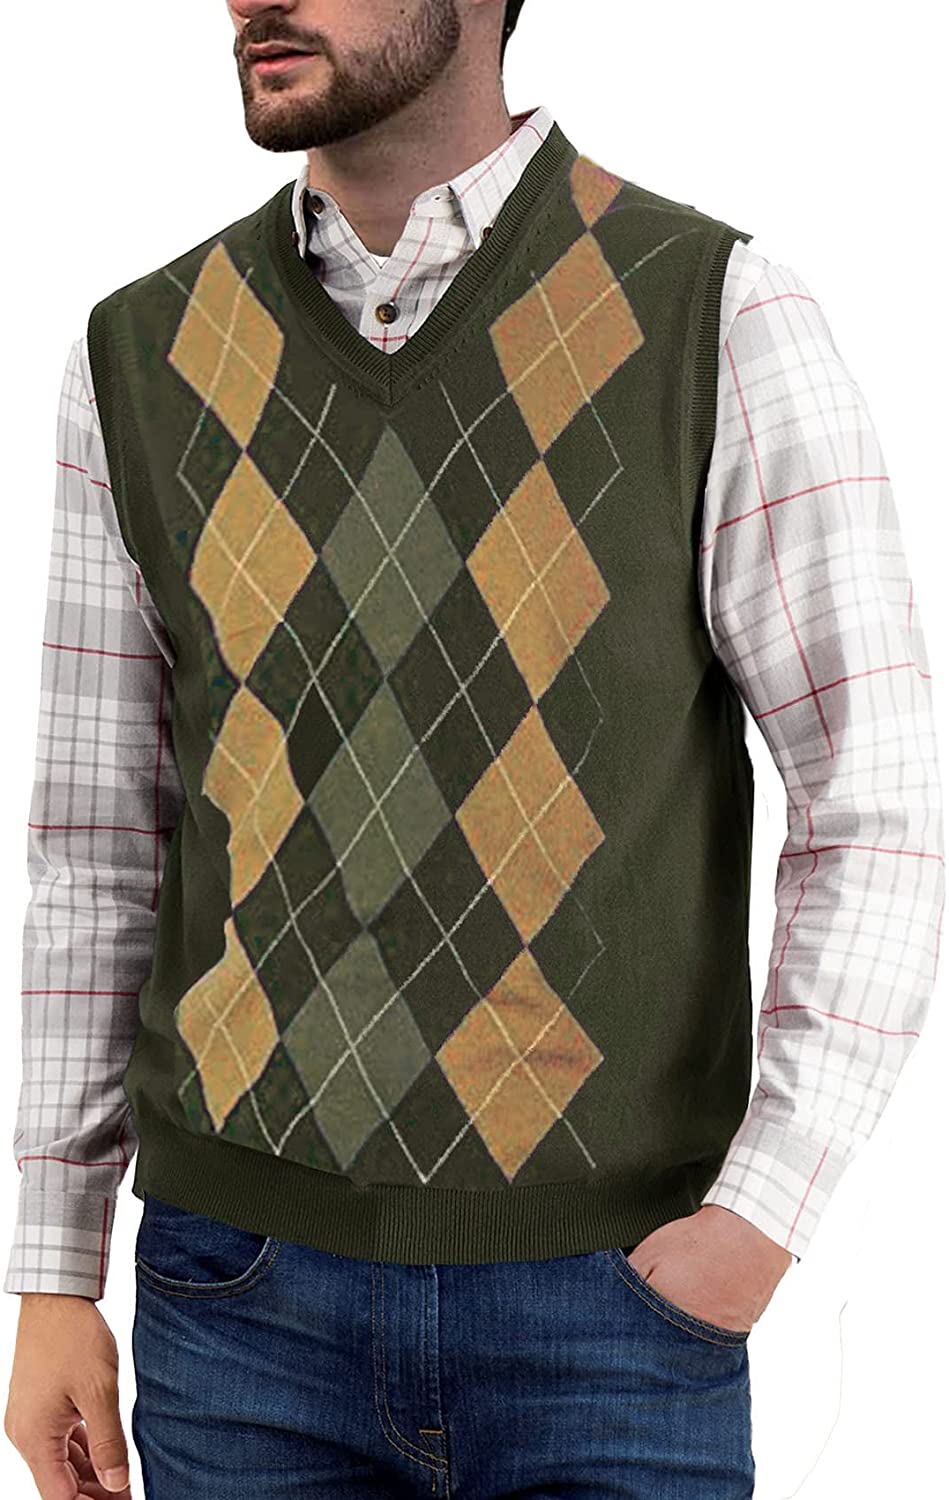 THE BEST SWEATER VESTS IN THE WORLD IN 2022